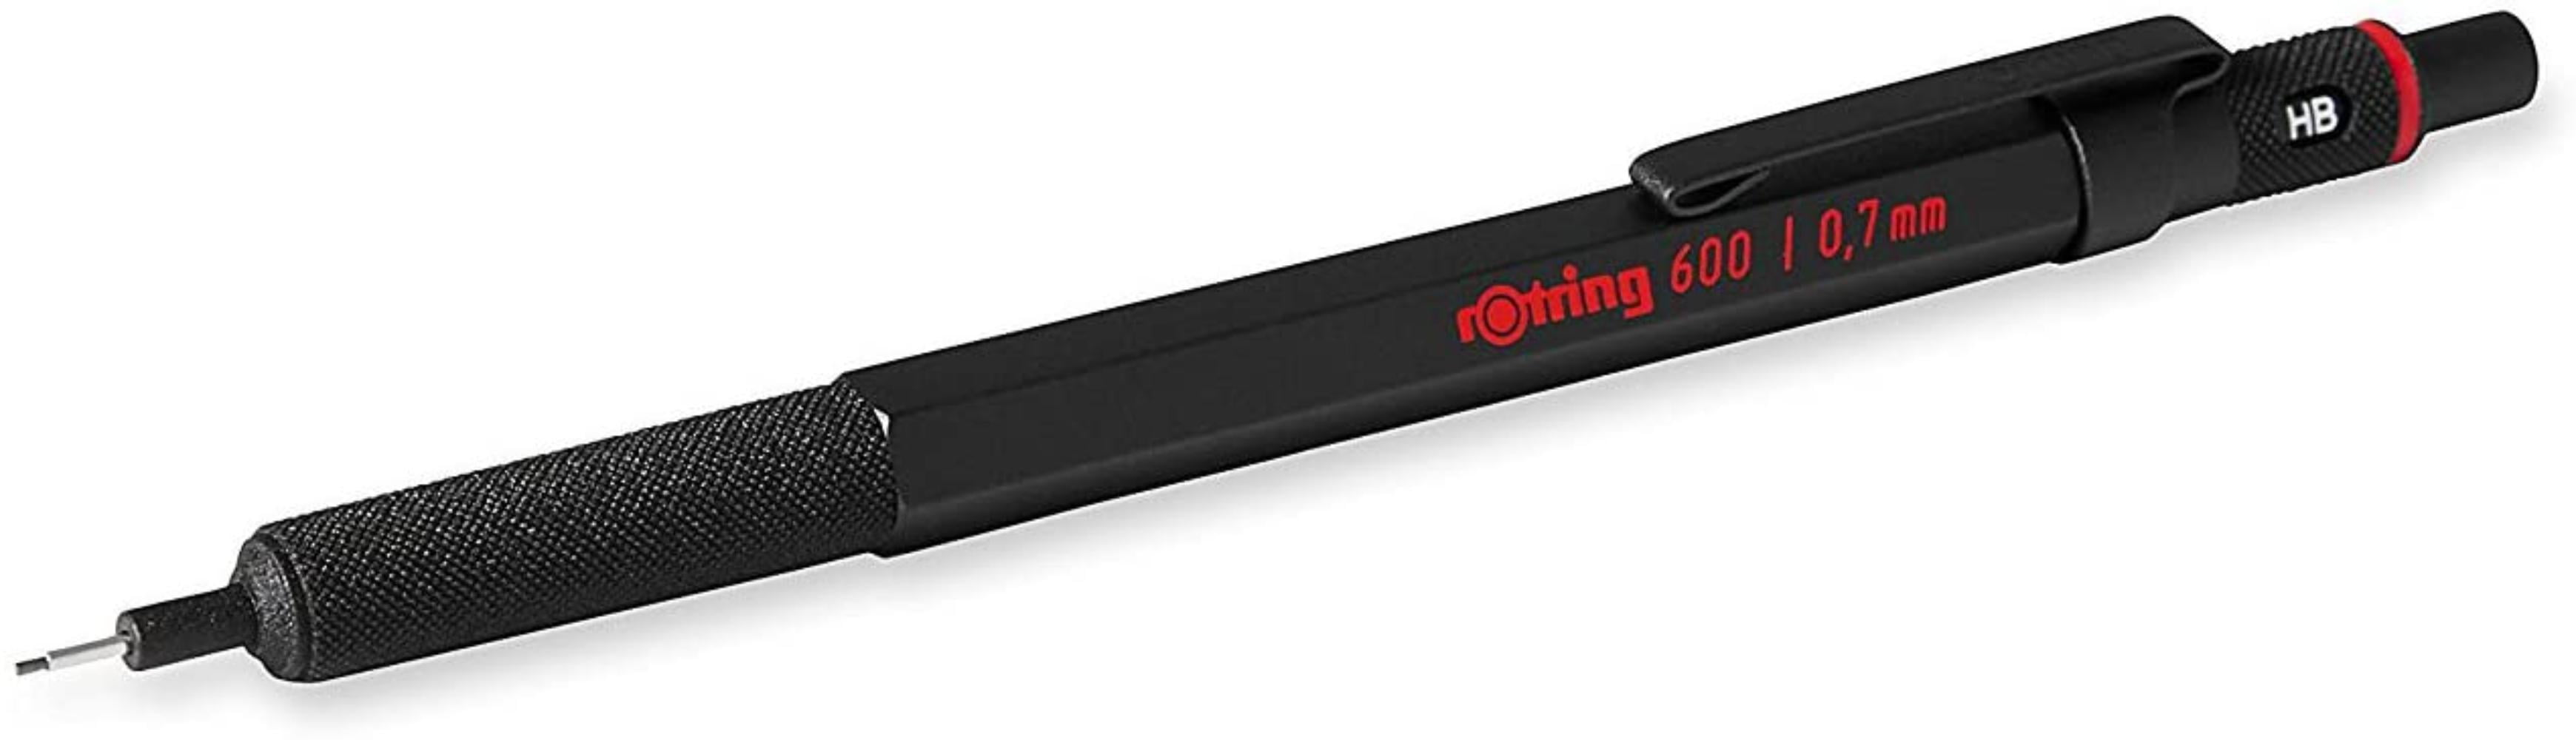 rOtring 1904442 600 Mechanical Pencil, 0.7 mm, Black Barrel, An iconic tool  meant for a lifetime of use. The full metal body provides ideal weight 